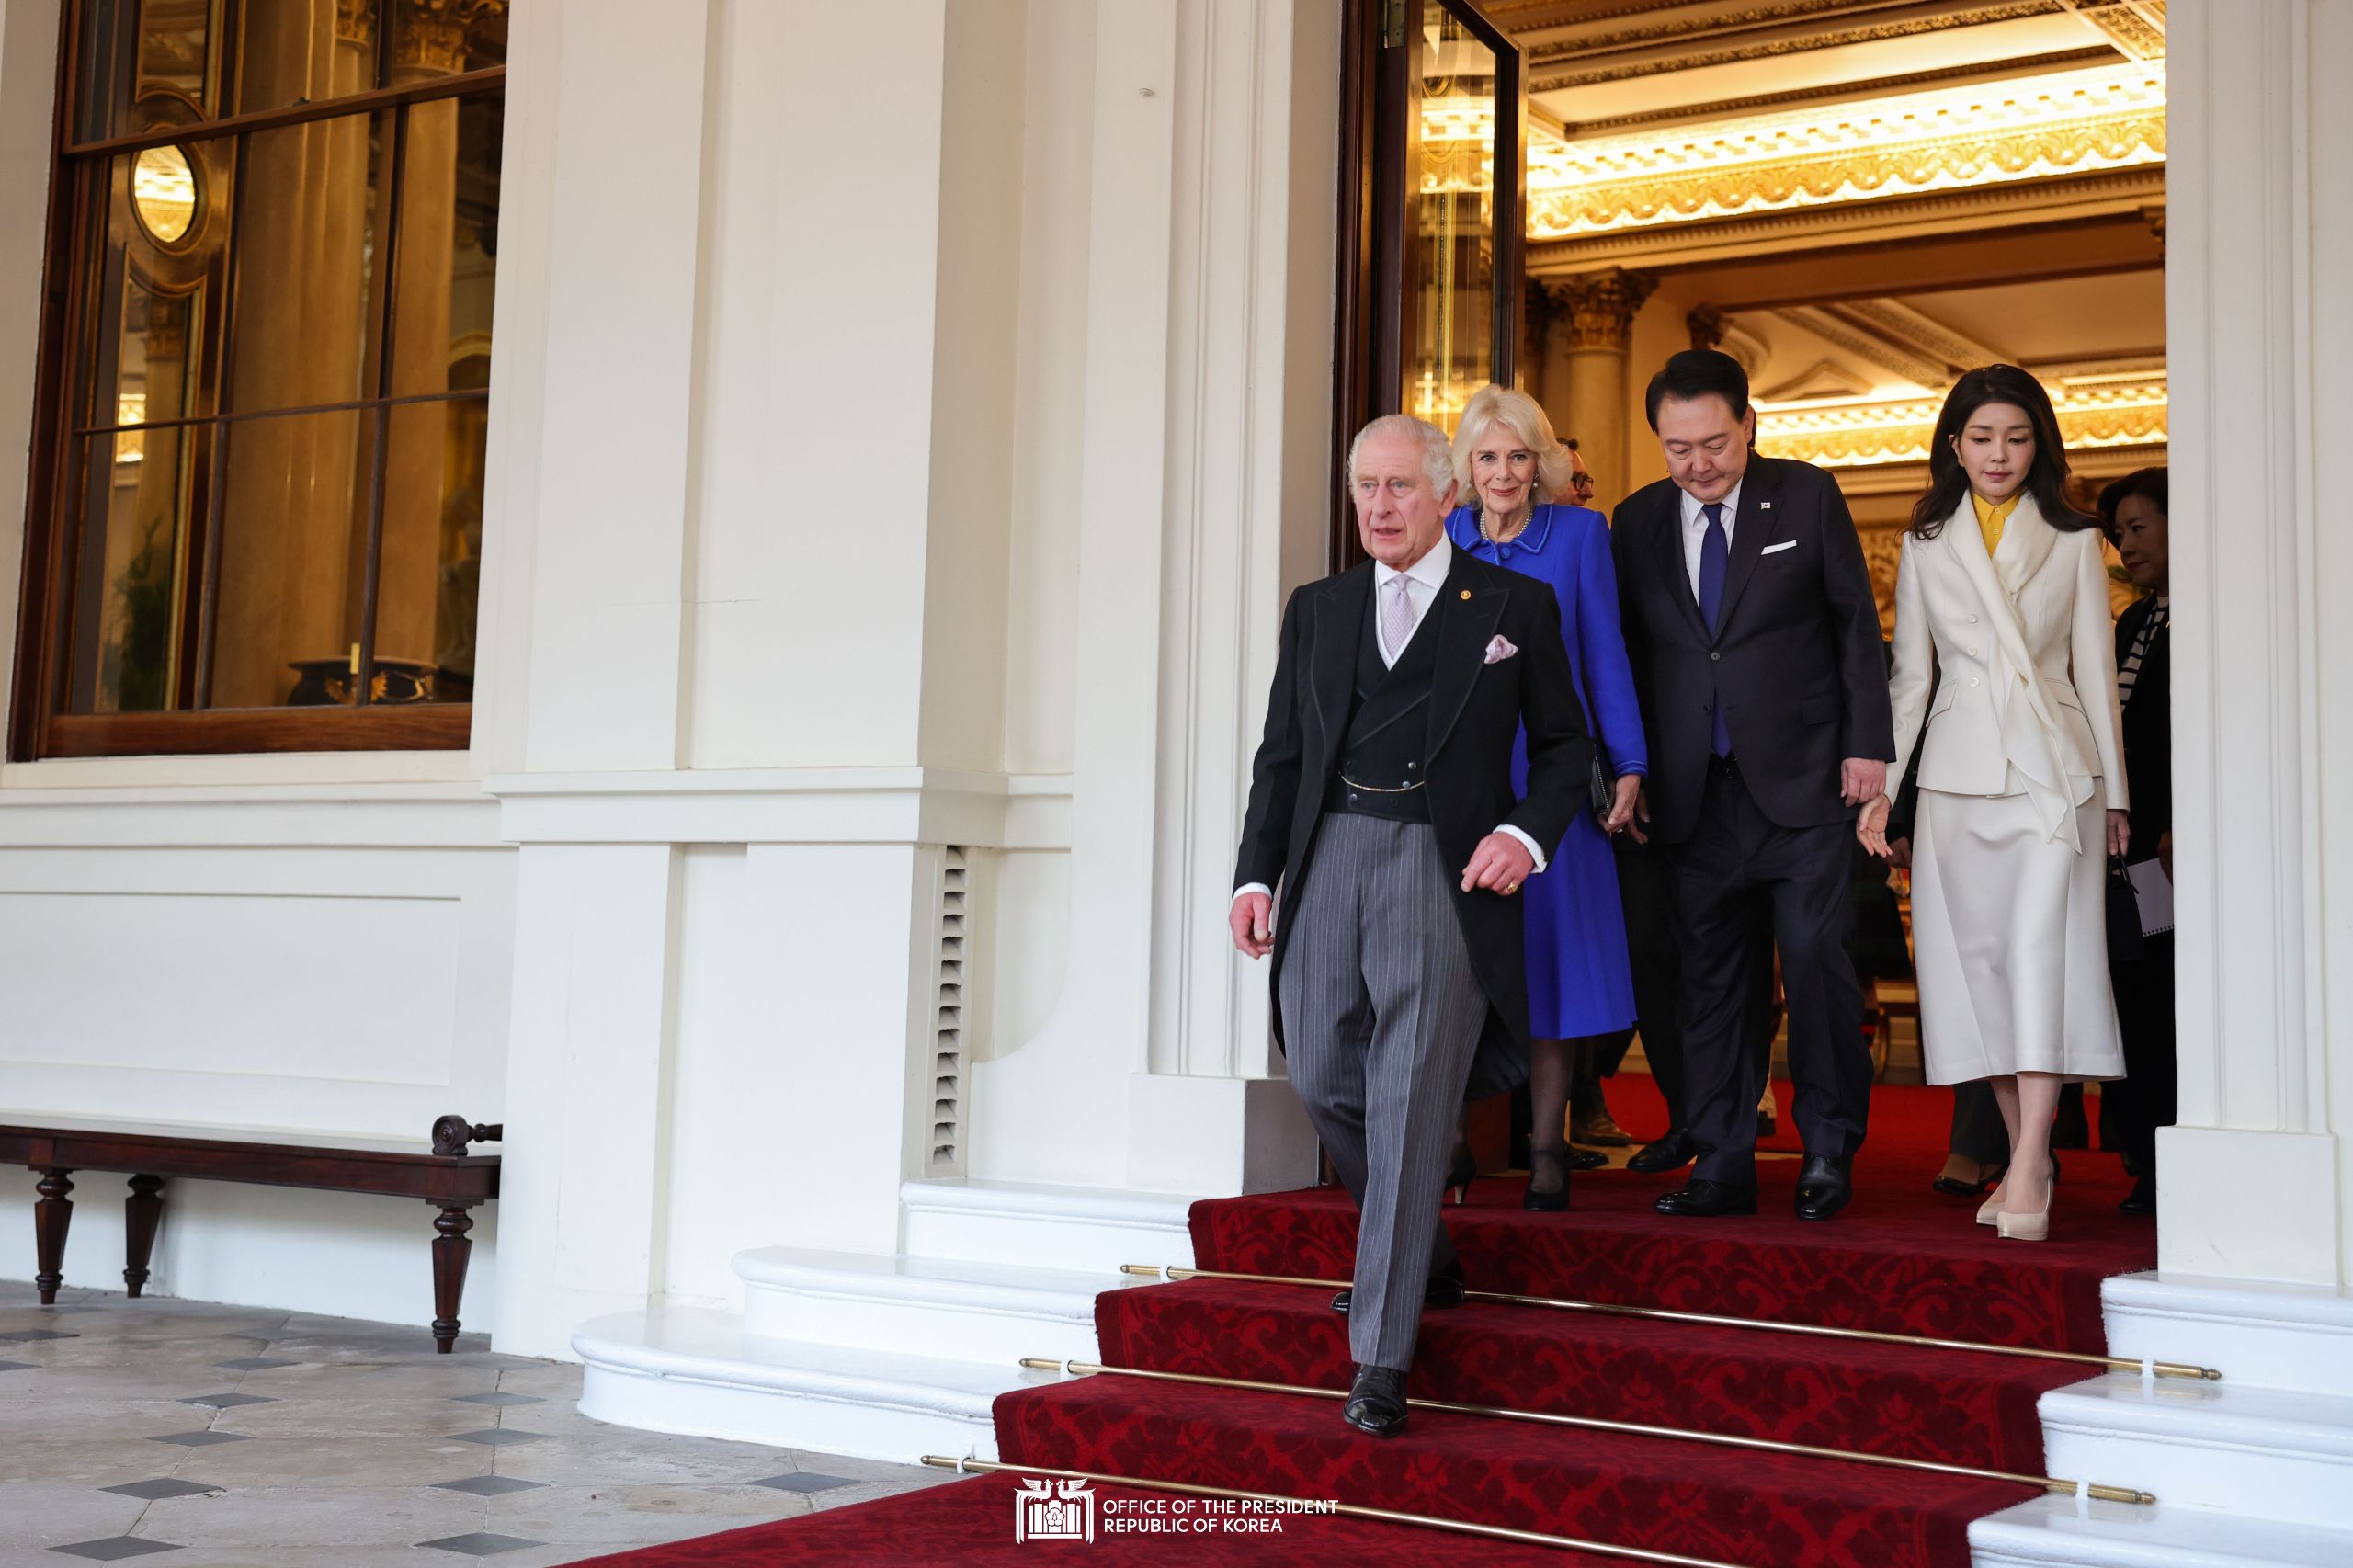 King Charles III and Queen Camilla bid a farewell to President Yoon Suk Yeol and First Lady Kim Keon Hee slide 1